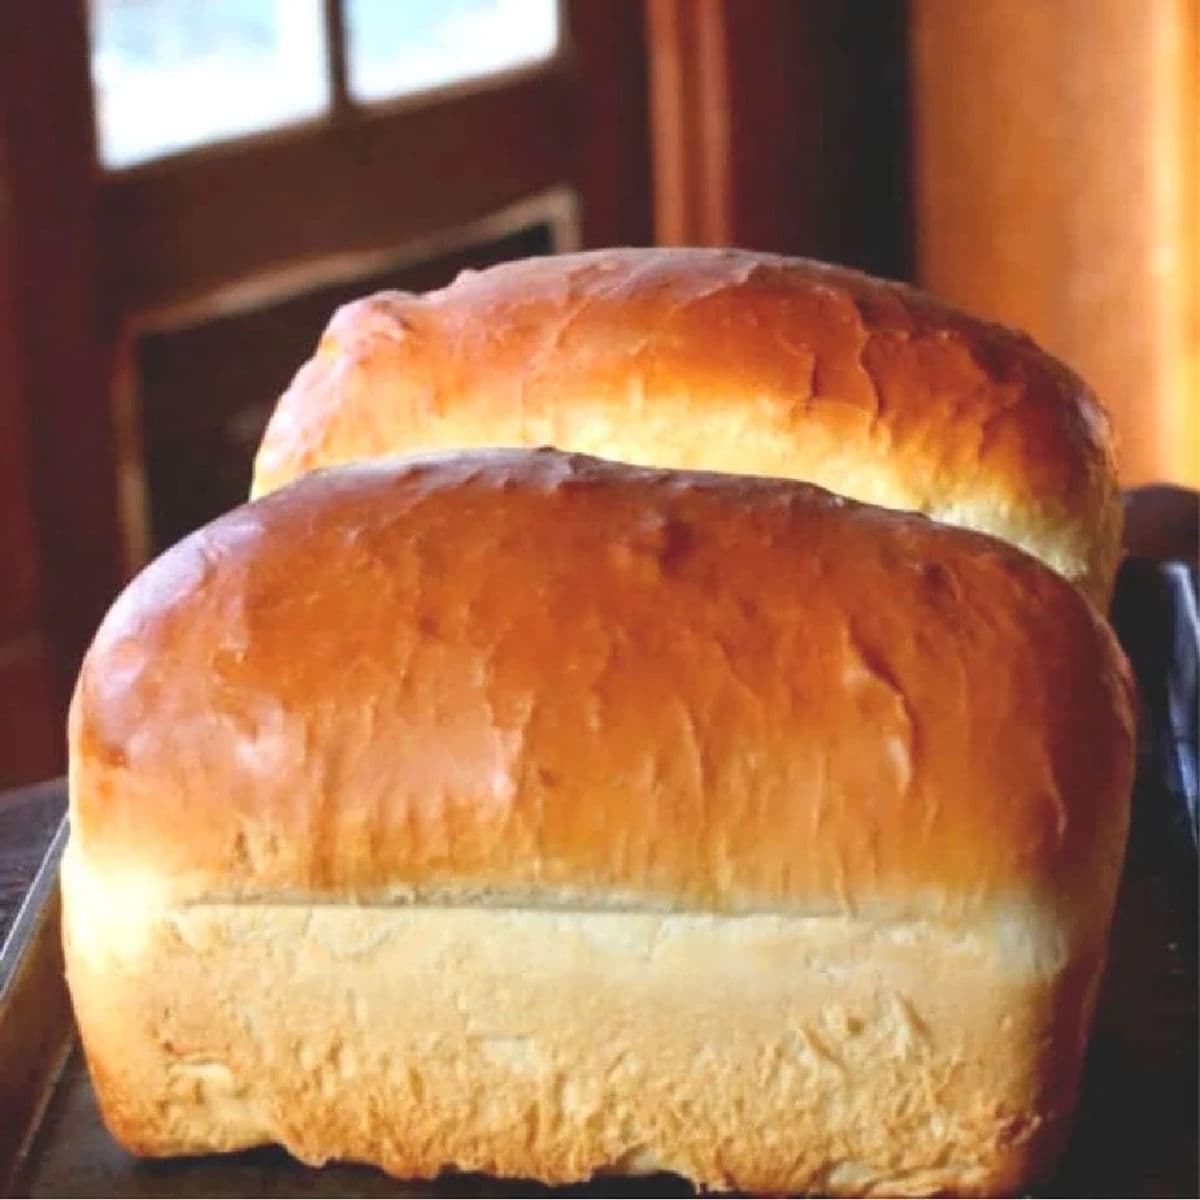 Old Fashioned Buttermilk Bread with Your KitchenAid Mixer